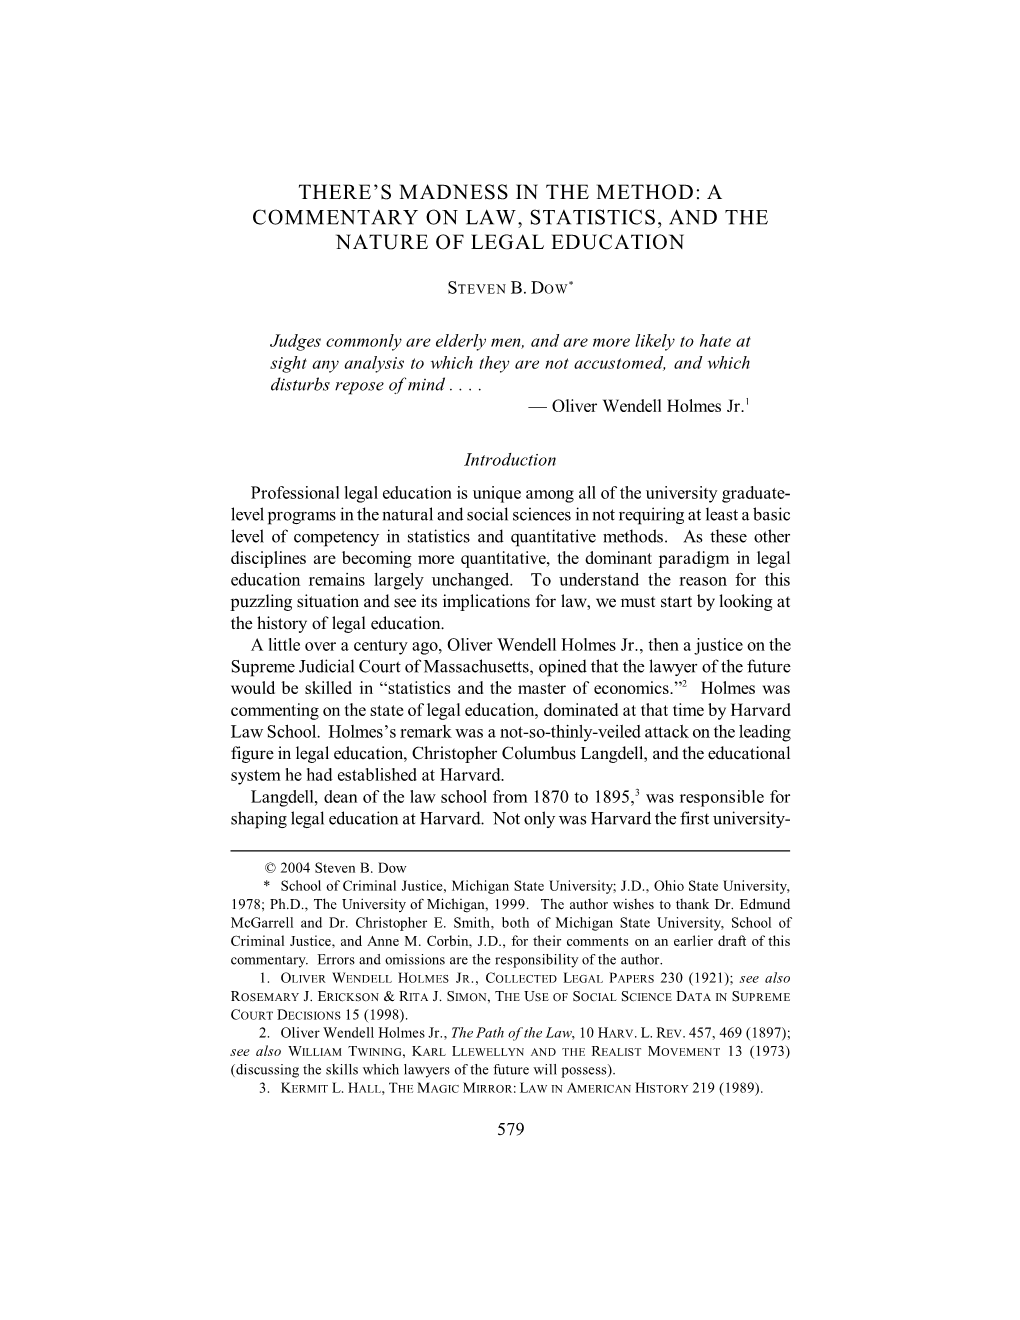 There's Madness in the Method: a Commentary on Law, Statistics, and the Nature of Legal Education